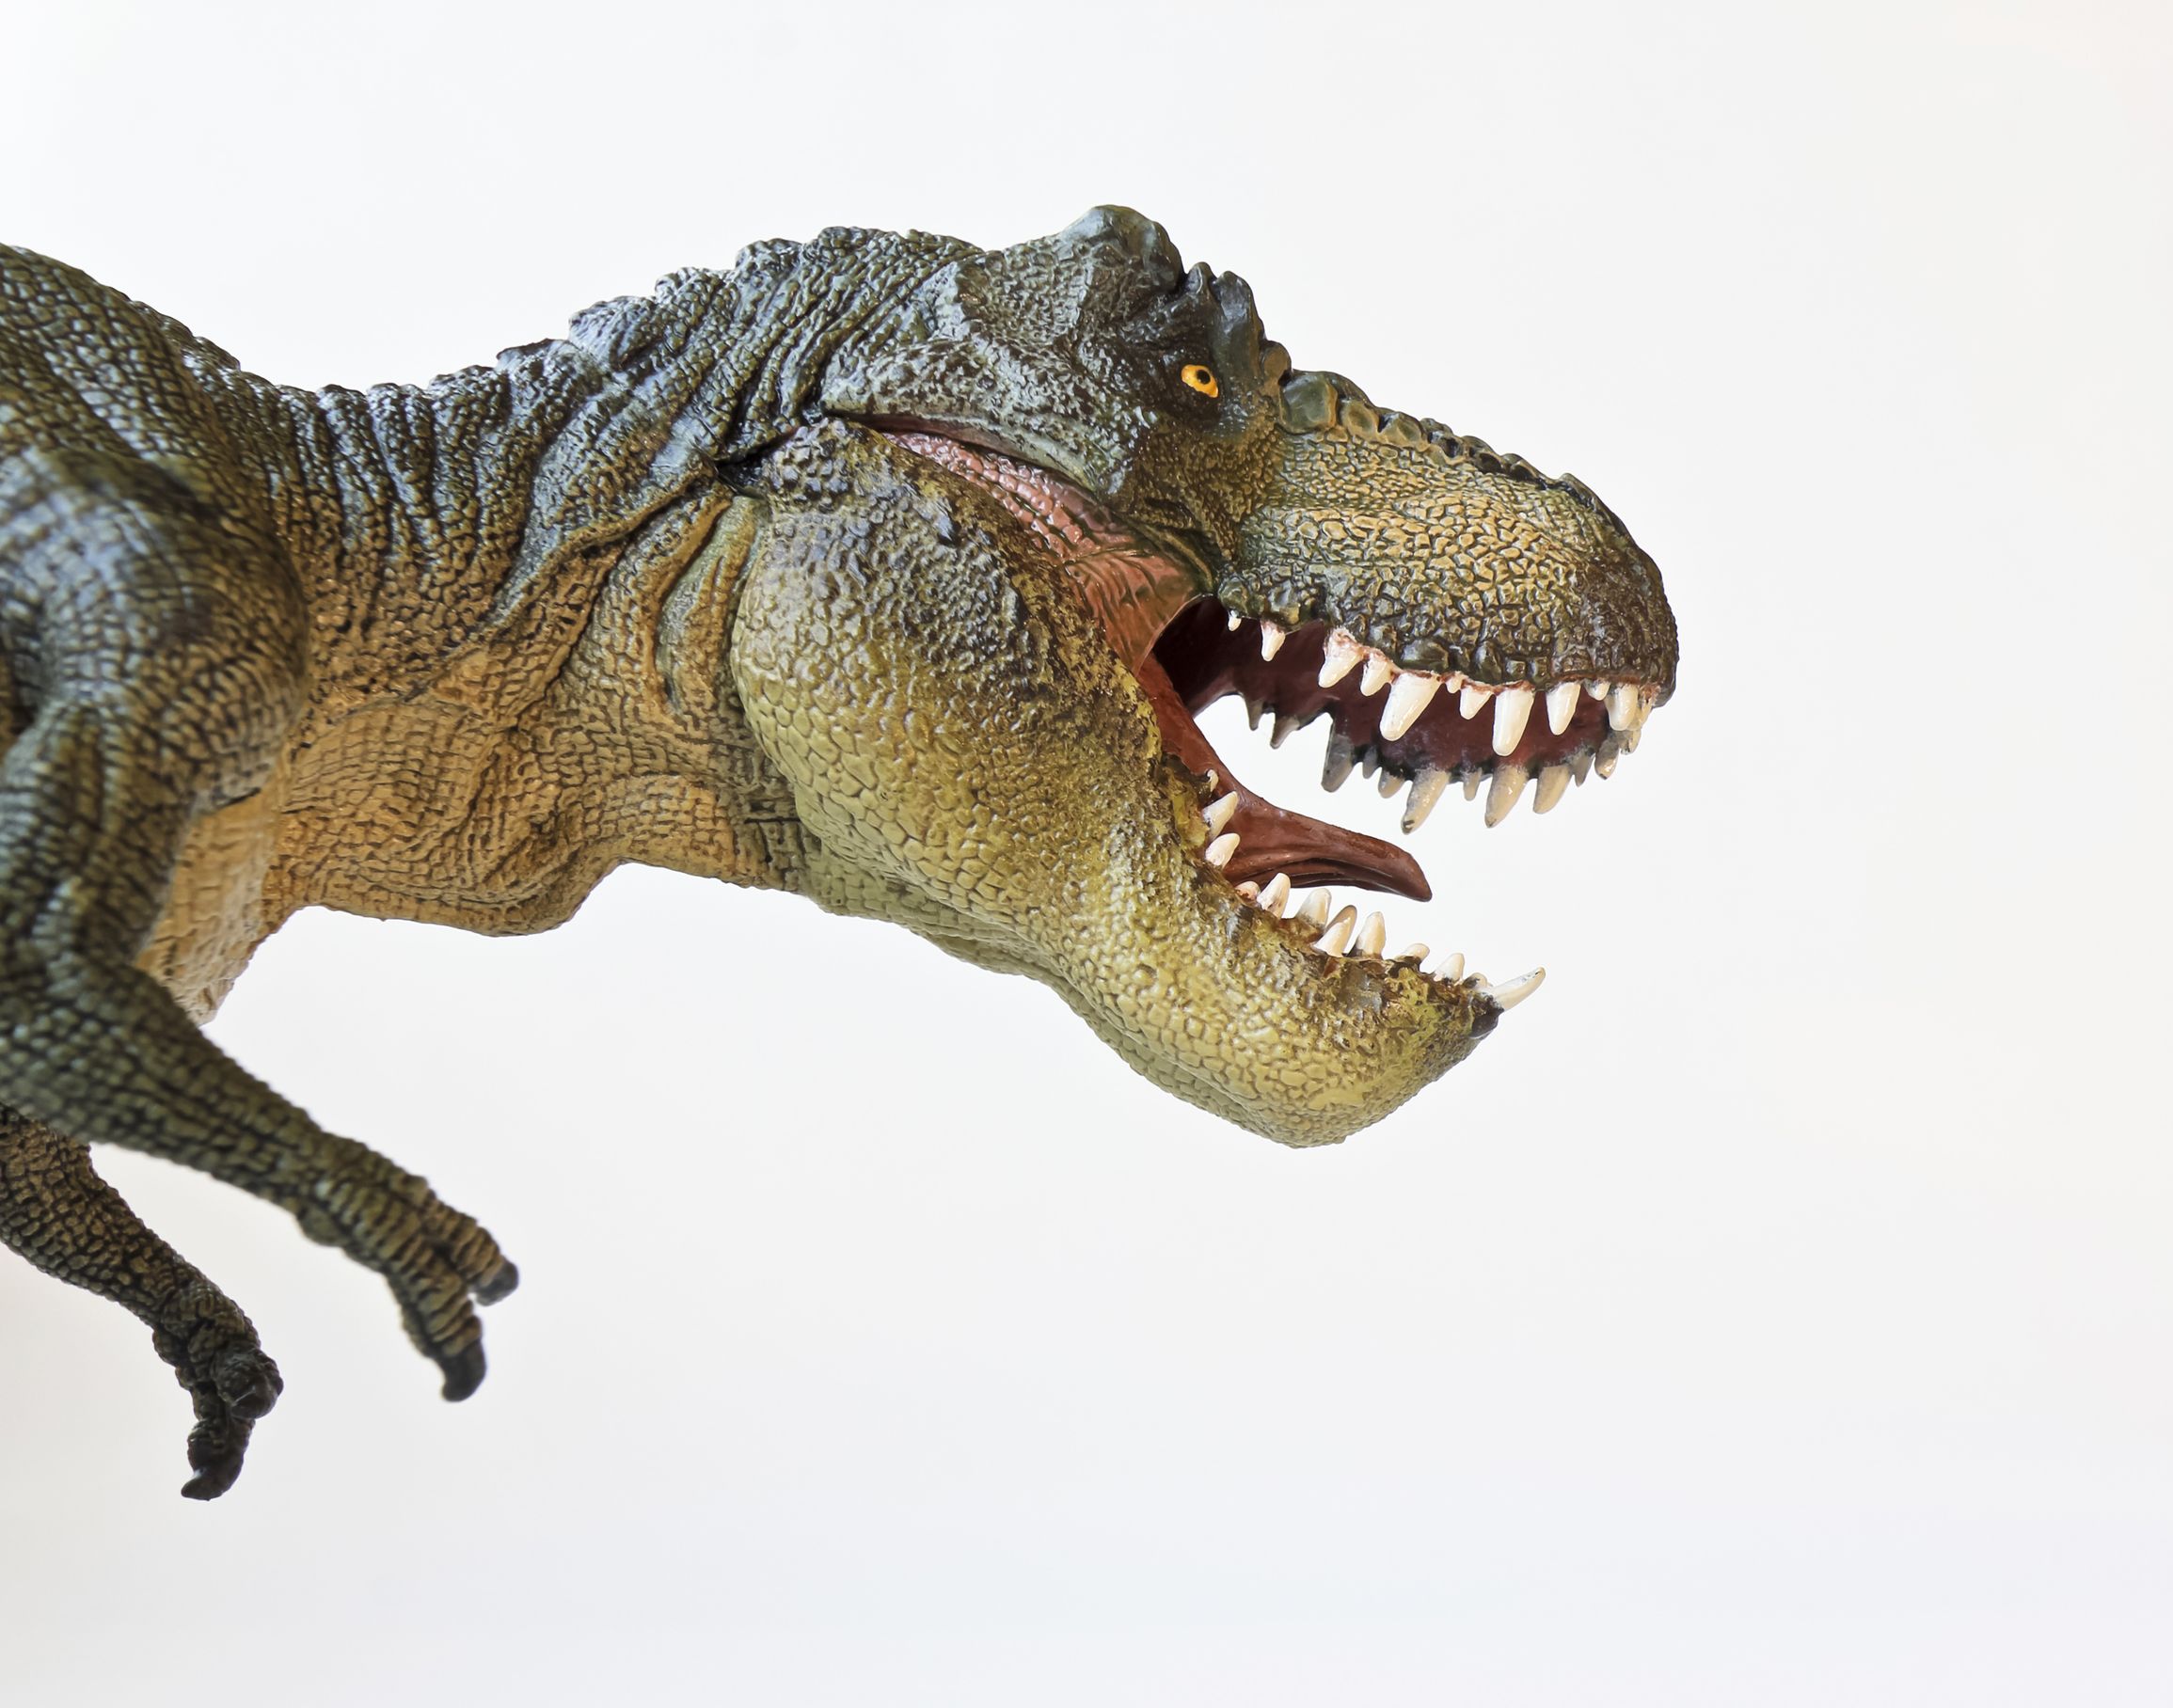 Dinosaurs: T. rex had more powerful jaws than its theropod ancestors